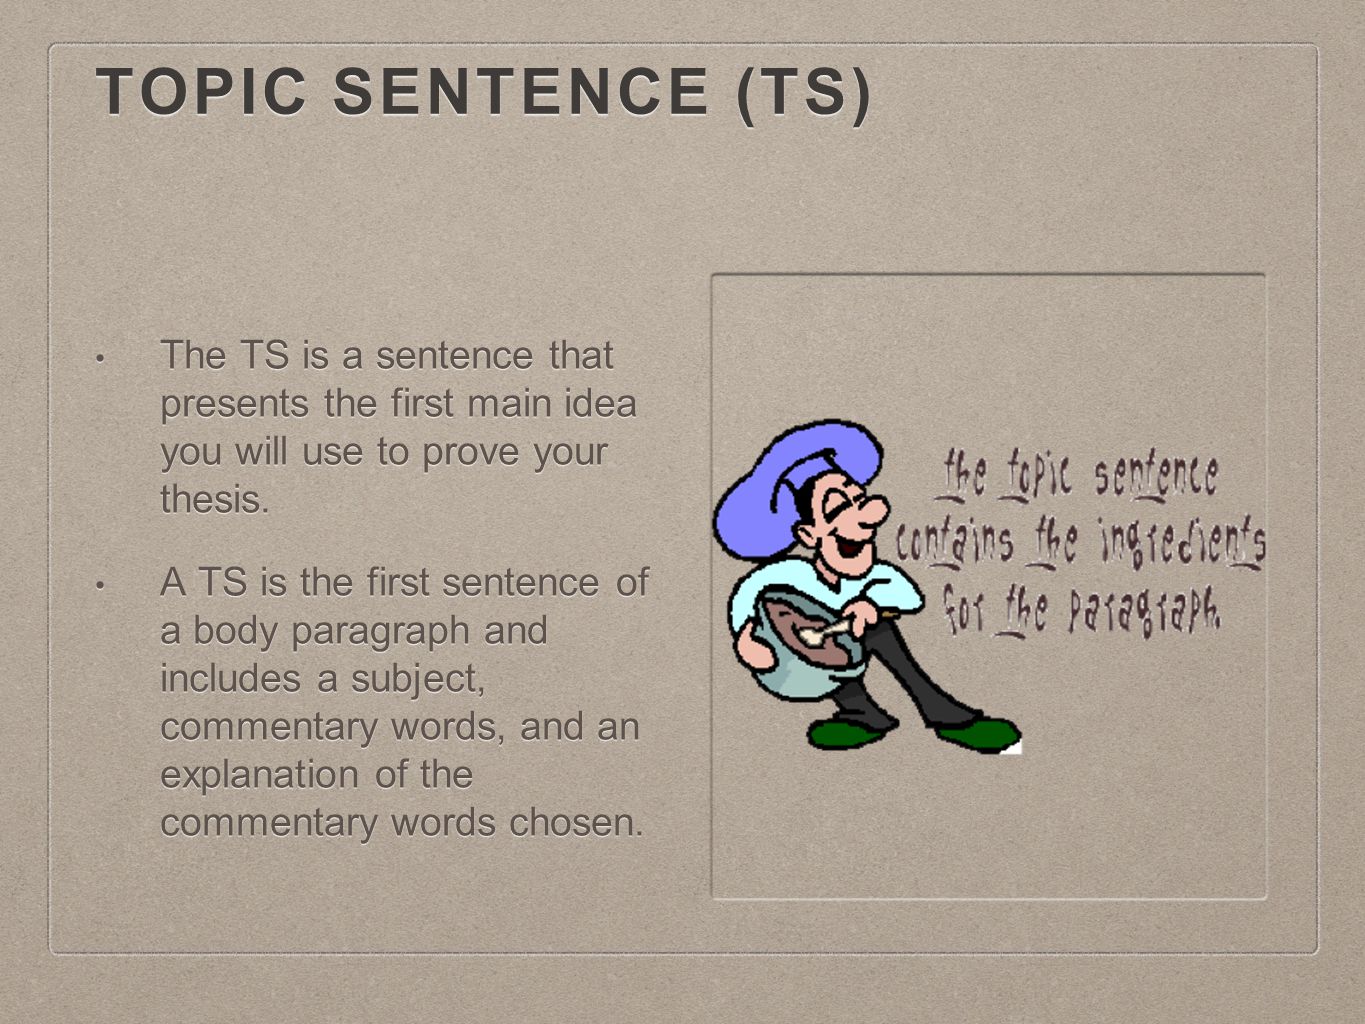 Topic Sentence (TS) The TS is a sentence that presents the first main idea you will use to prove your thesis.